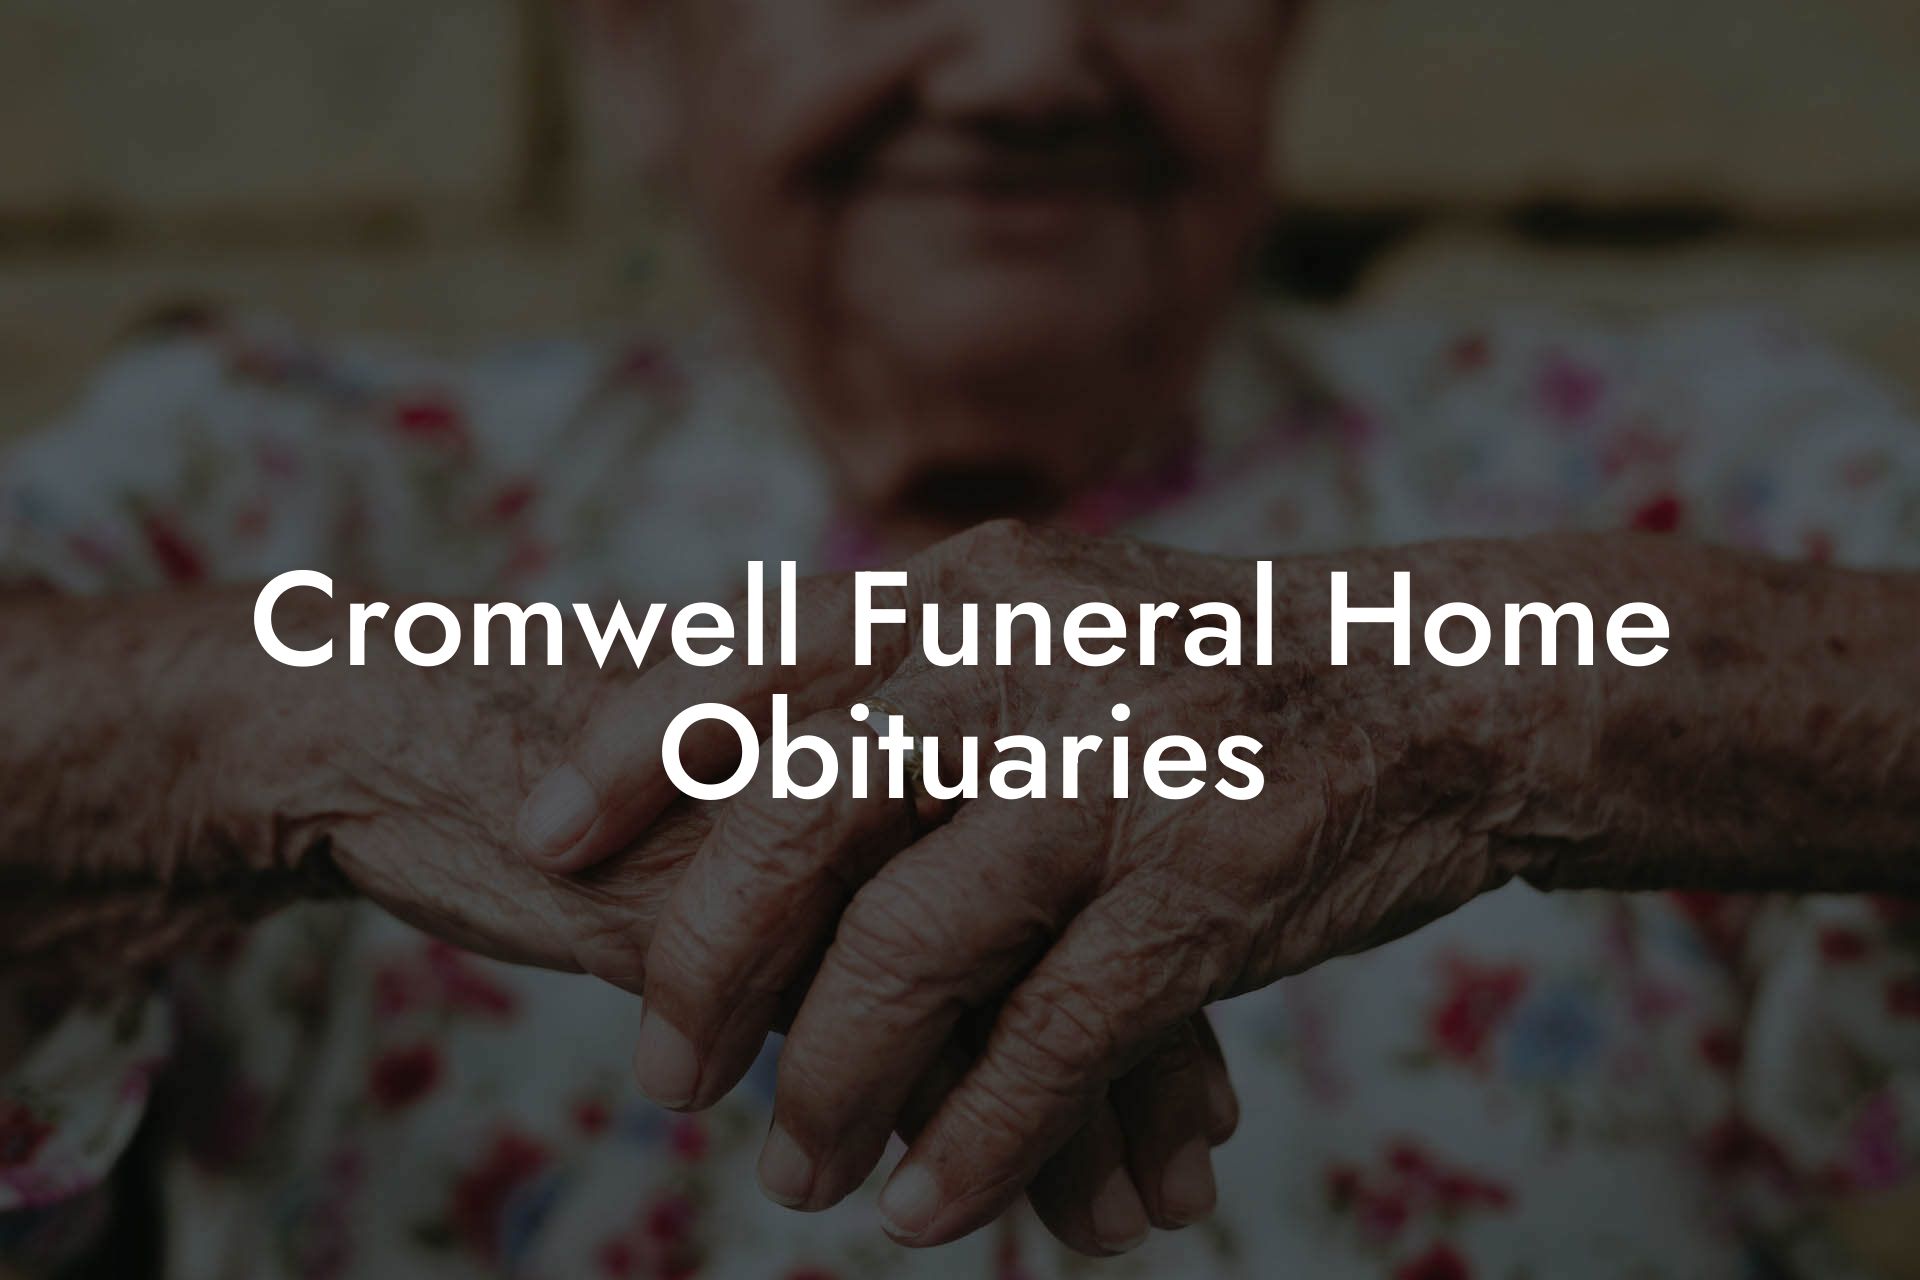 Cromwell Funeral Home Obituaries